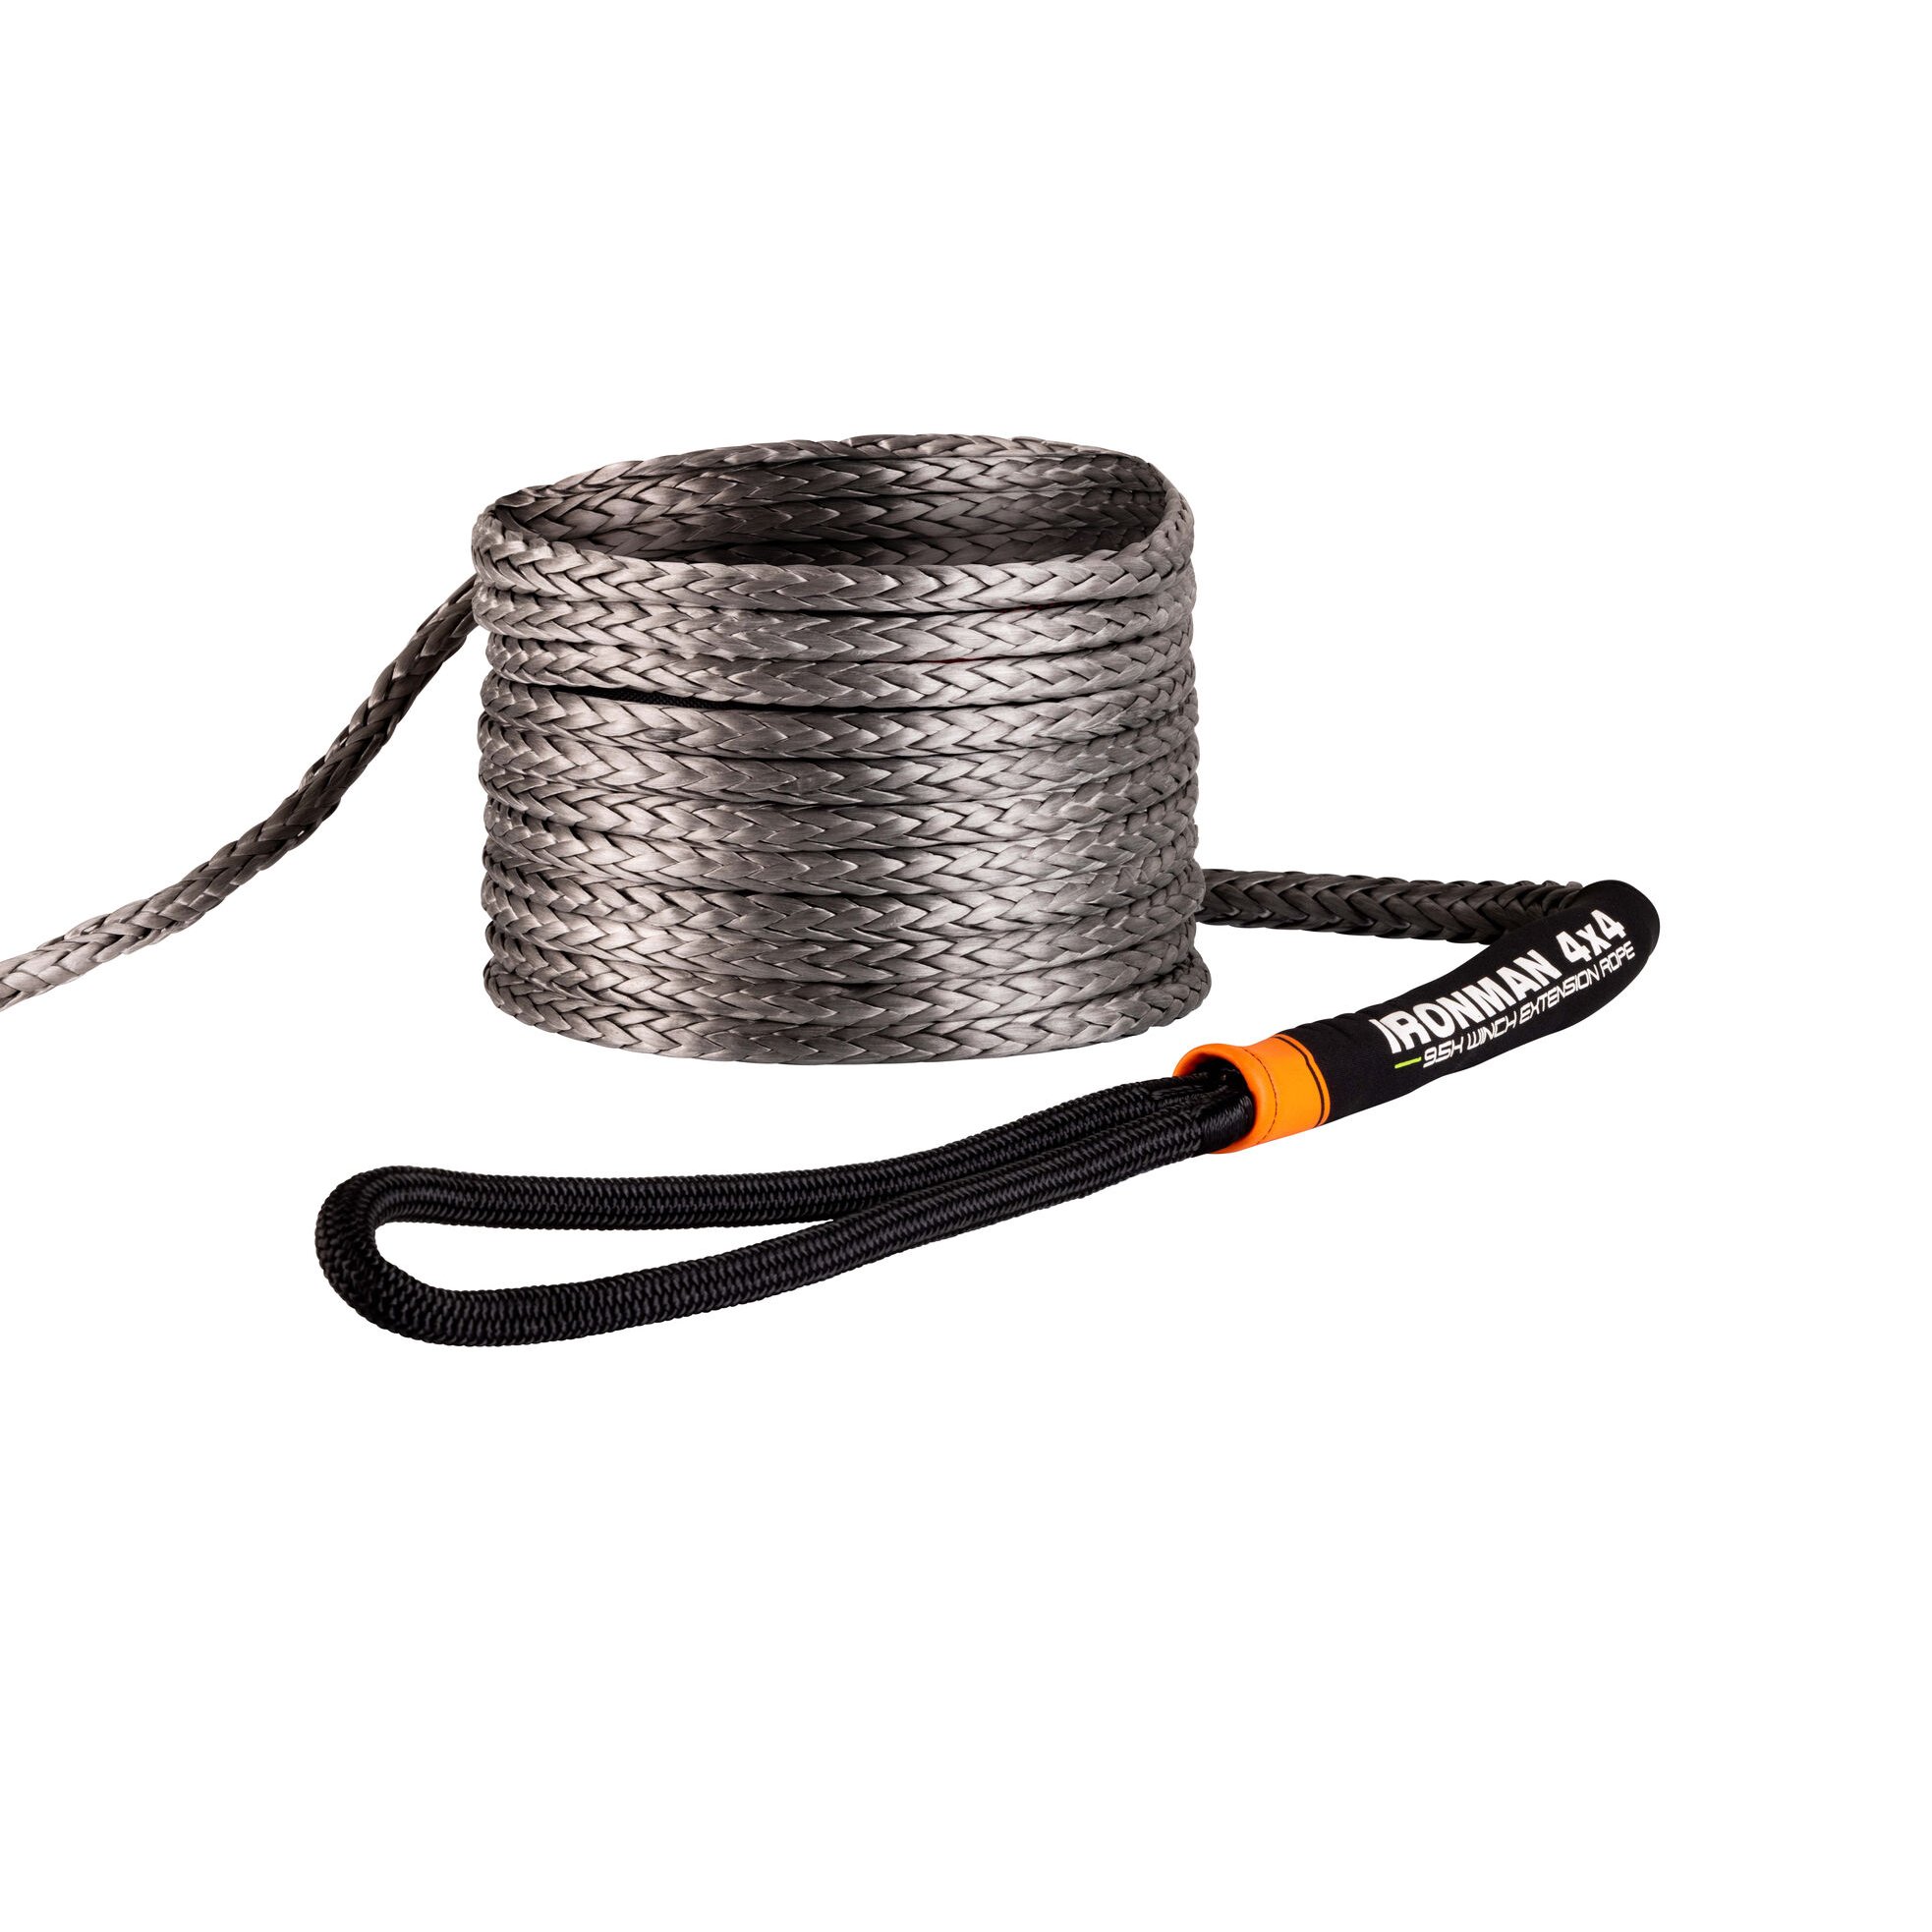 20M WINCH EXTENSION ROPE 9,500KG